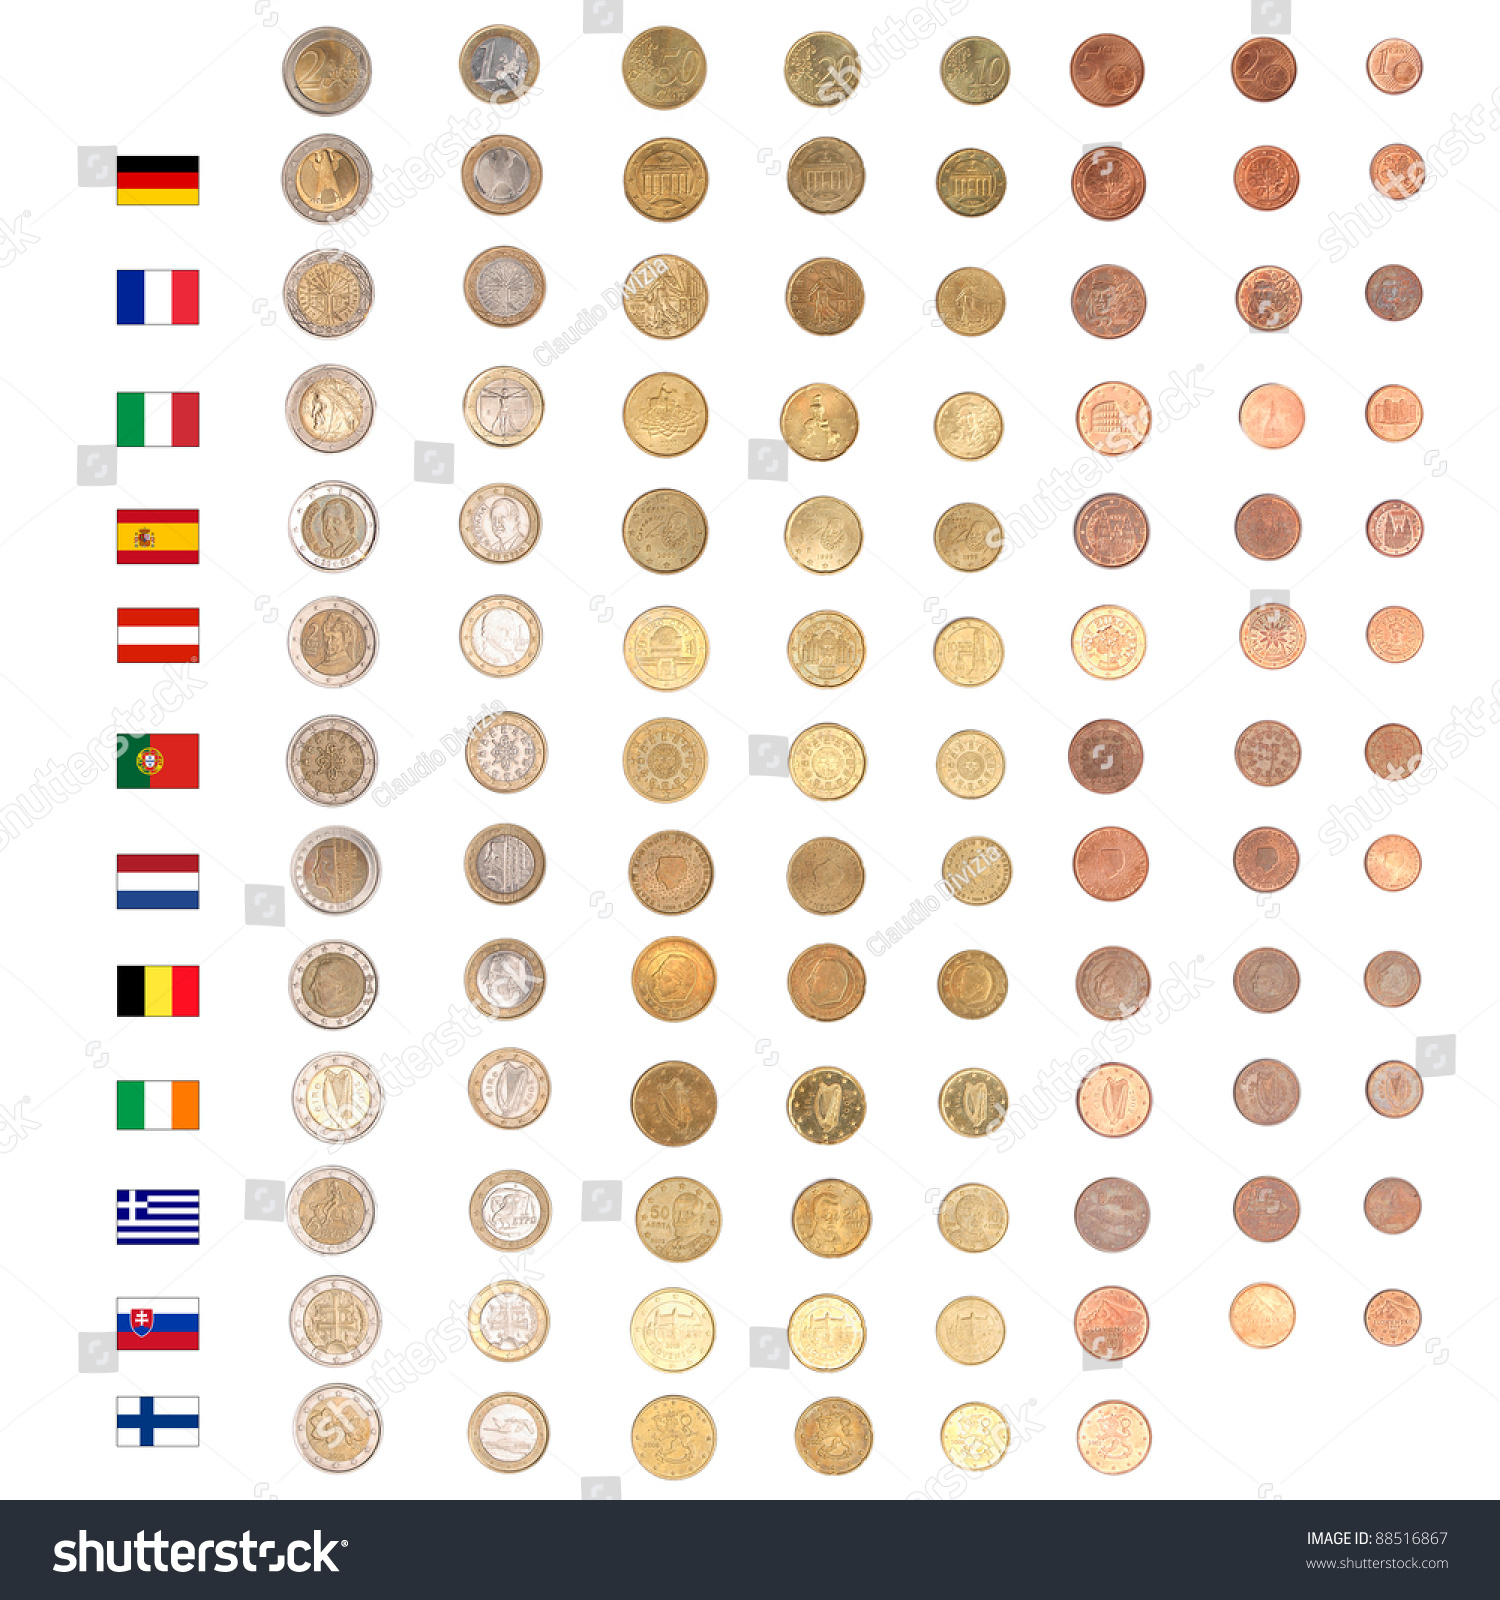 29 Simple All euro coin designs with Download